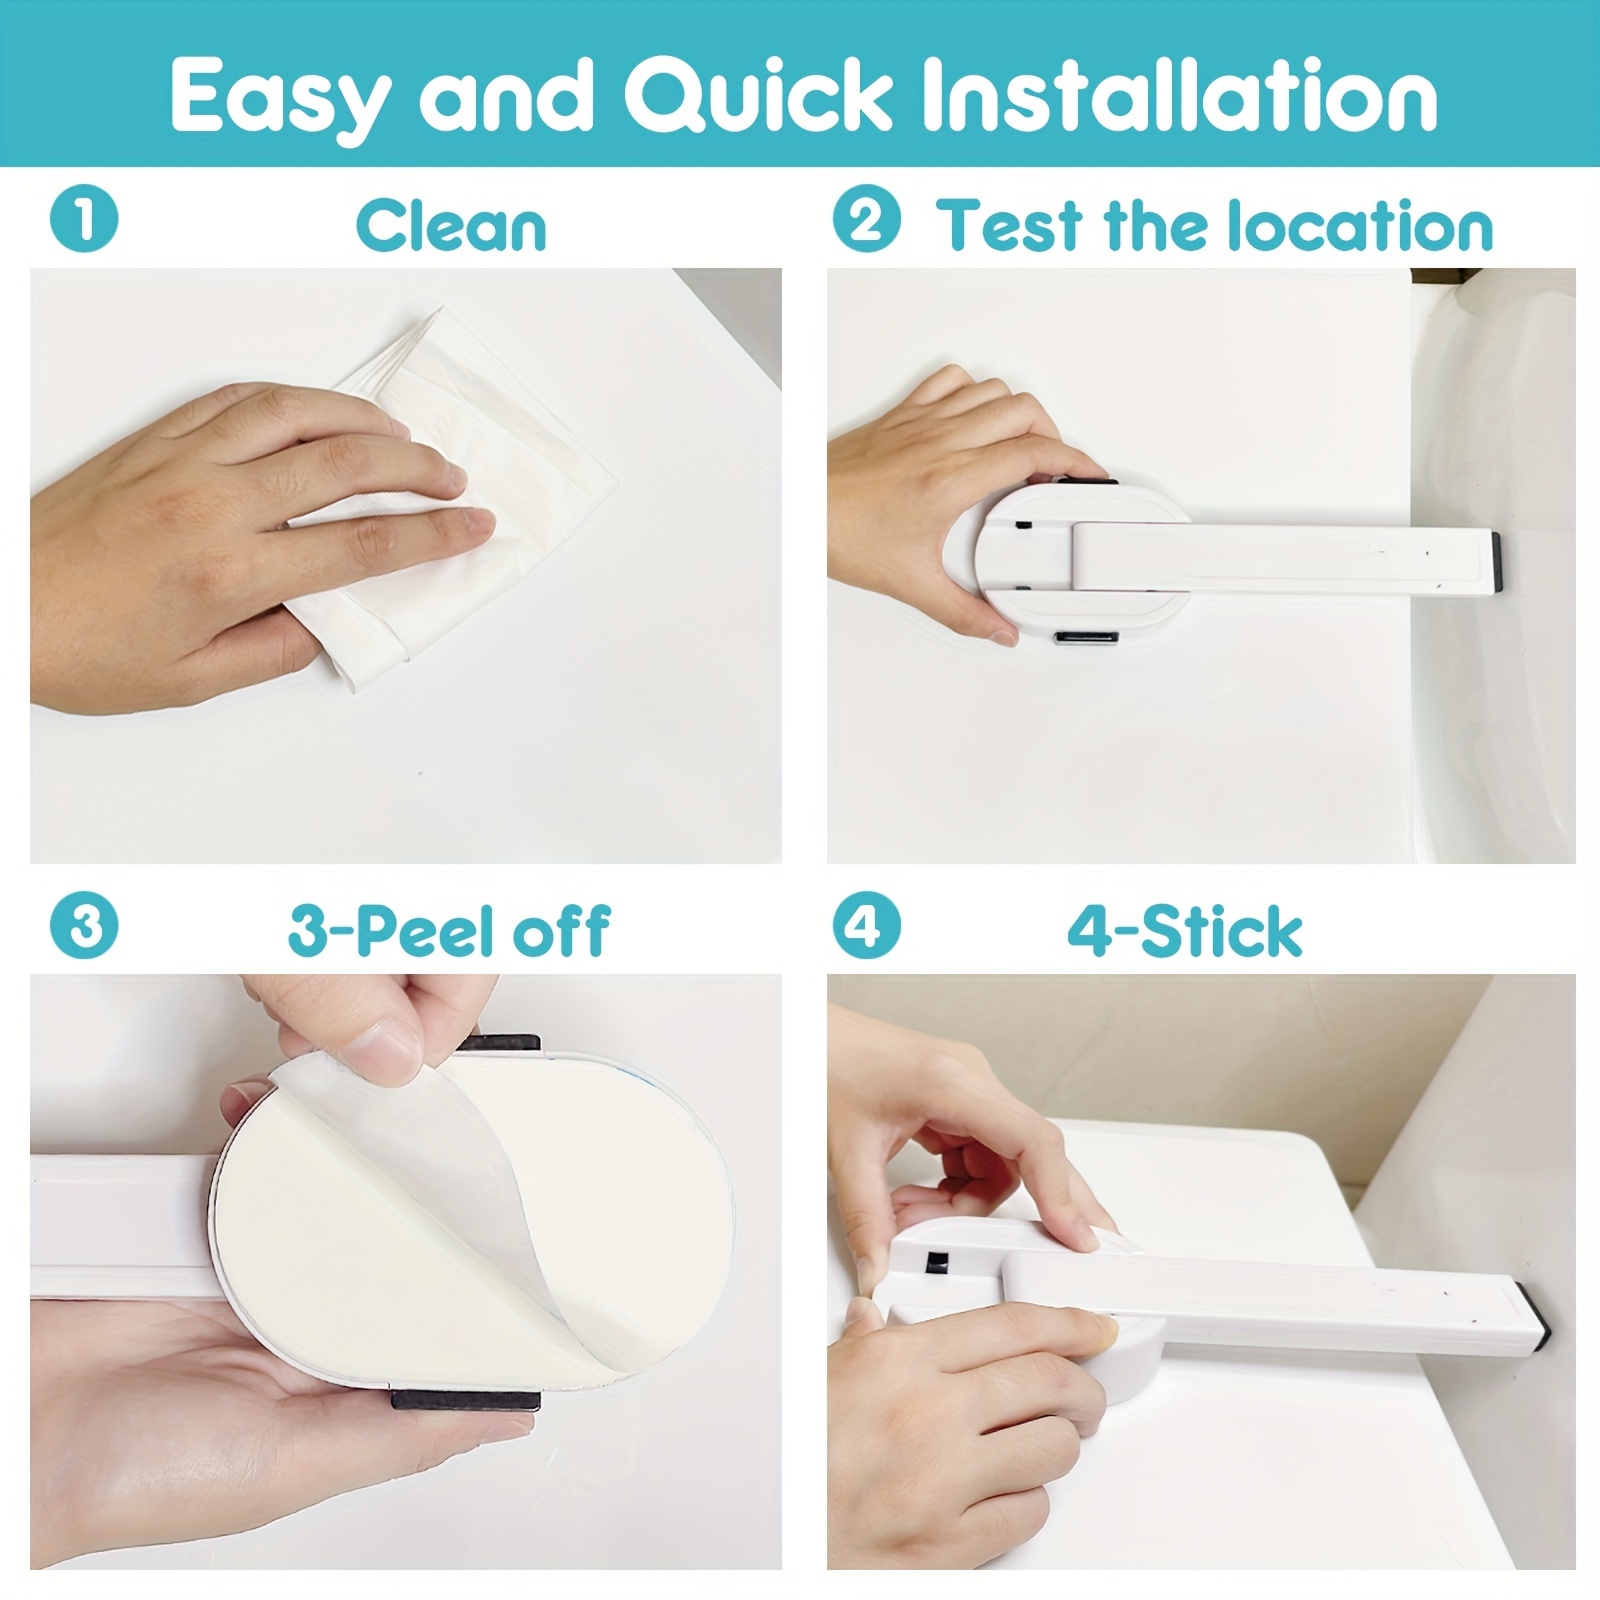 Toilet Locks Baby Proof,Ideal Child Proof Toilet Seat Lock with Arm -  Toilet Seat Lock Child Safety - No Tools,No Drill Needed Easy Installation  with